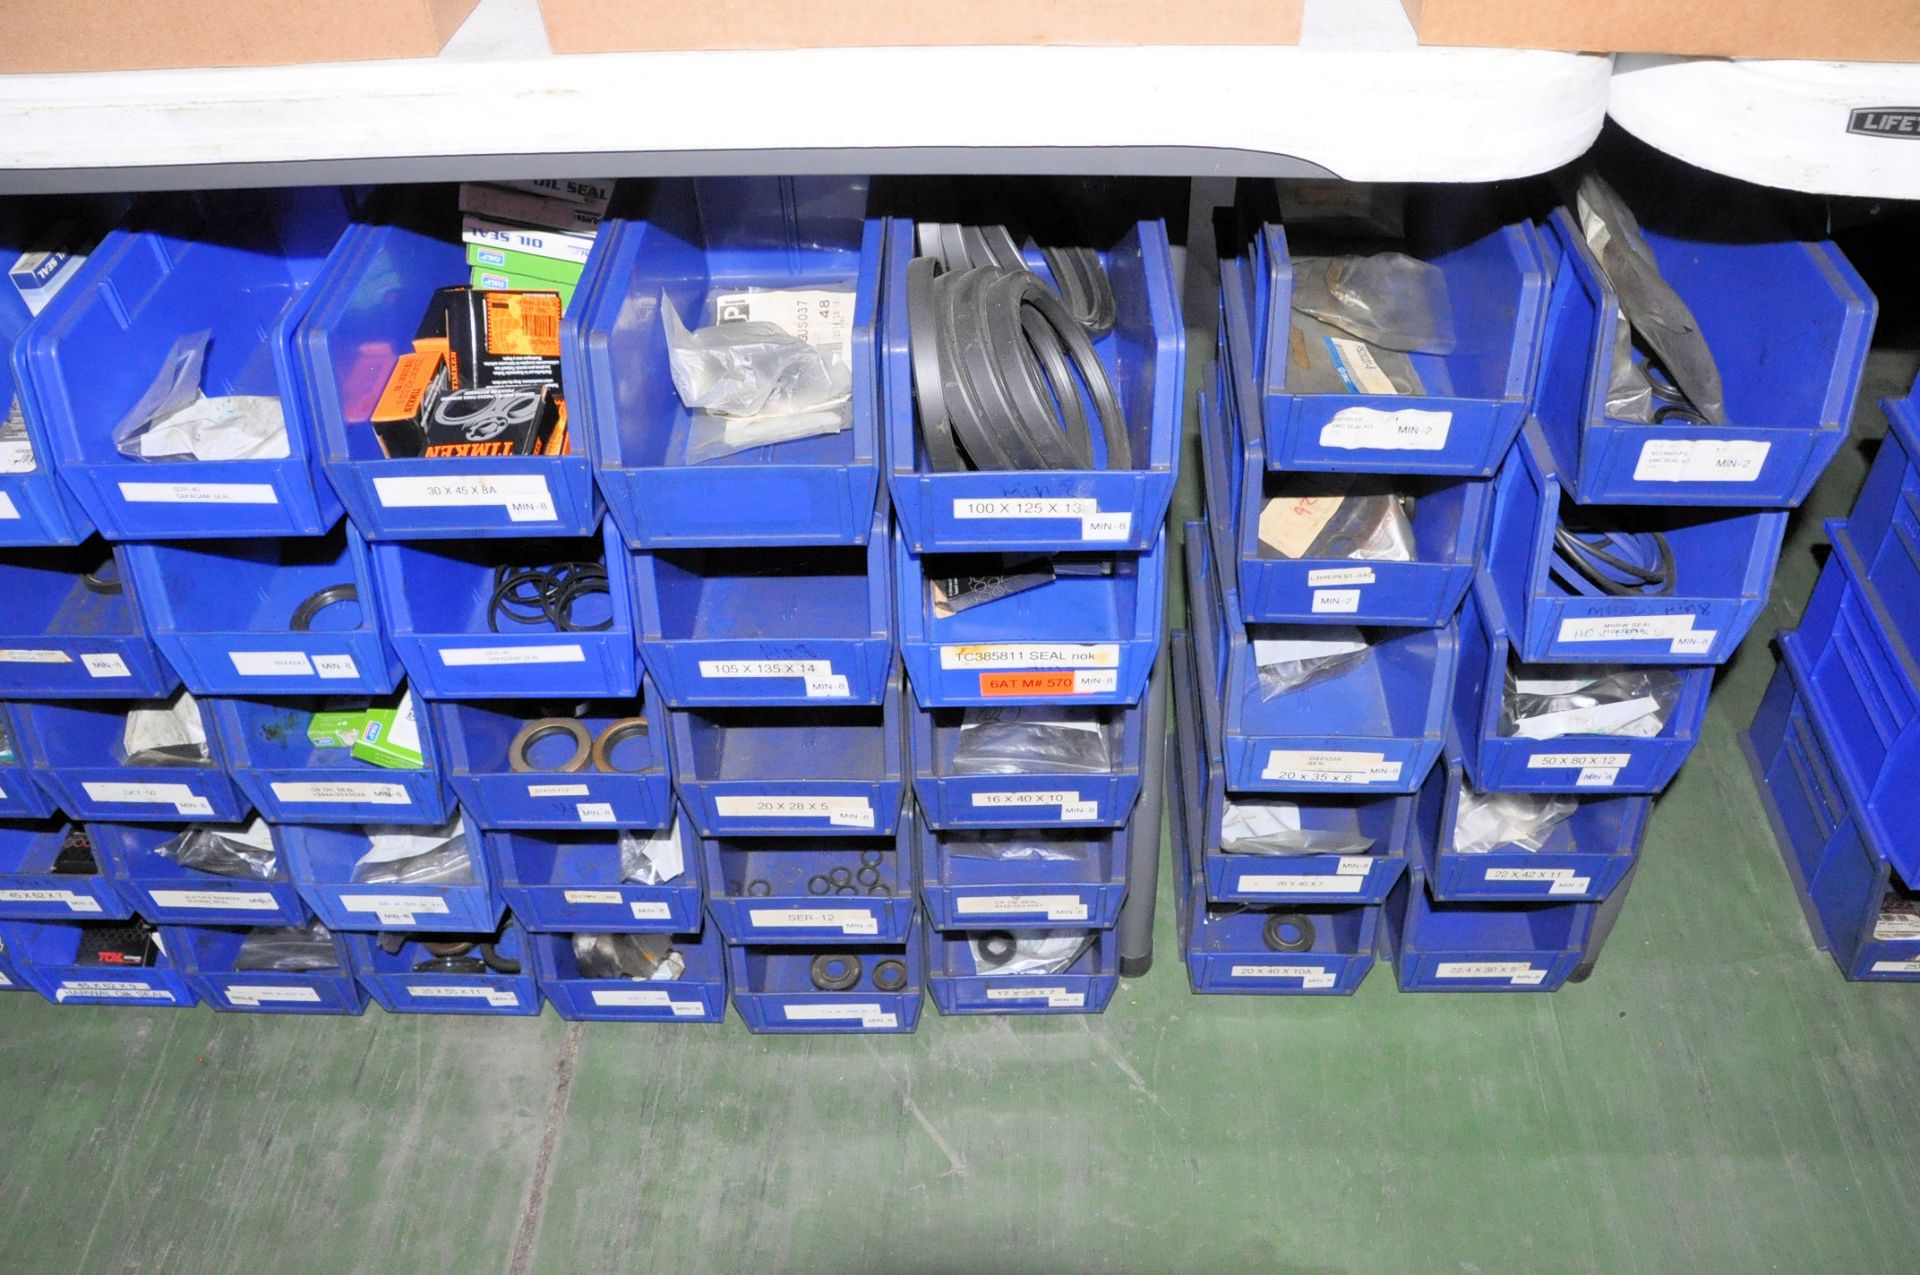 Lot-Various Bearing Seals in Blue Parts Bins on Floor Under (3) Tables, (E-3) - Image 5 of 6